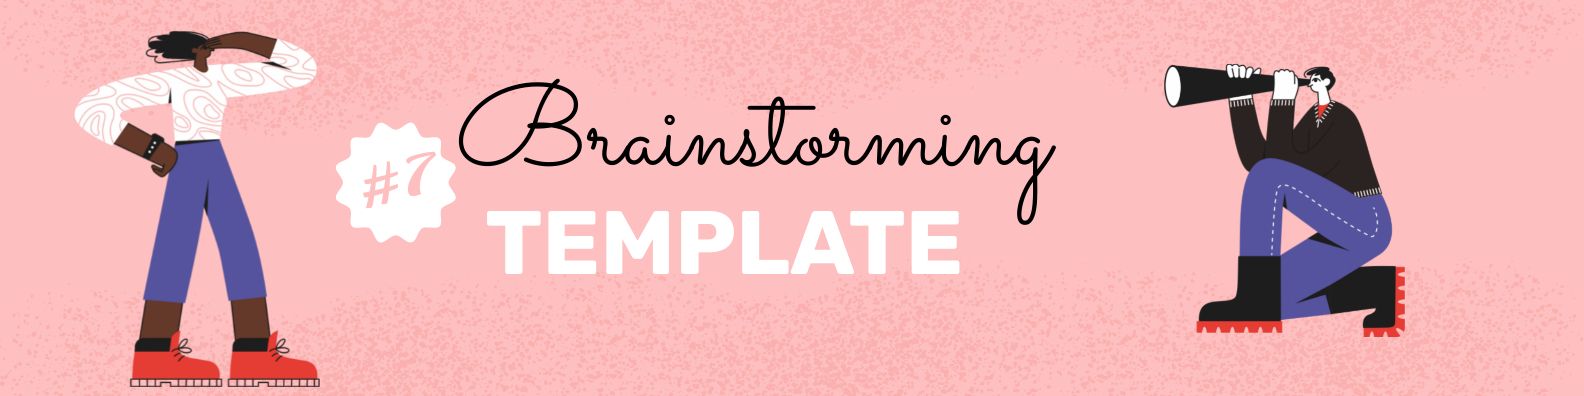 people are searching for brainstorming templates 7 